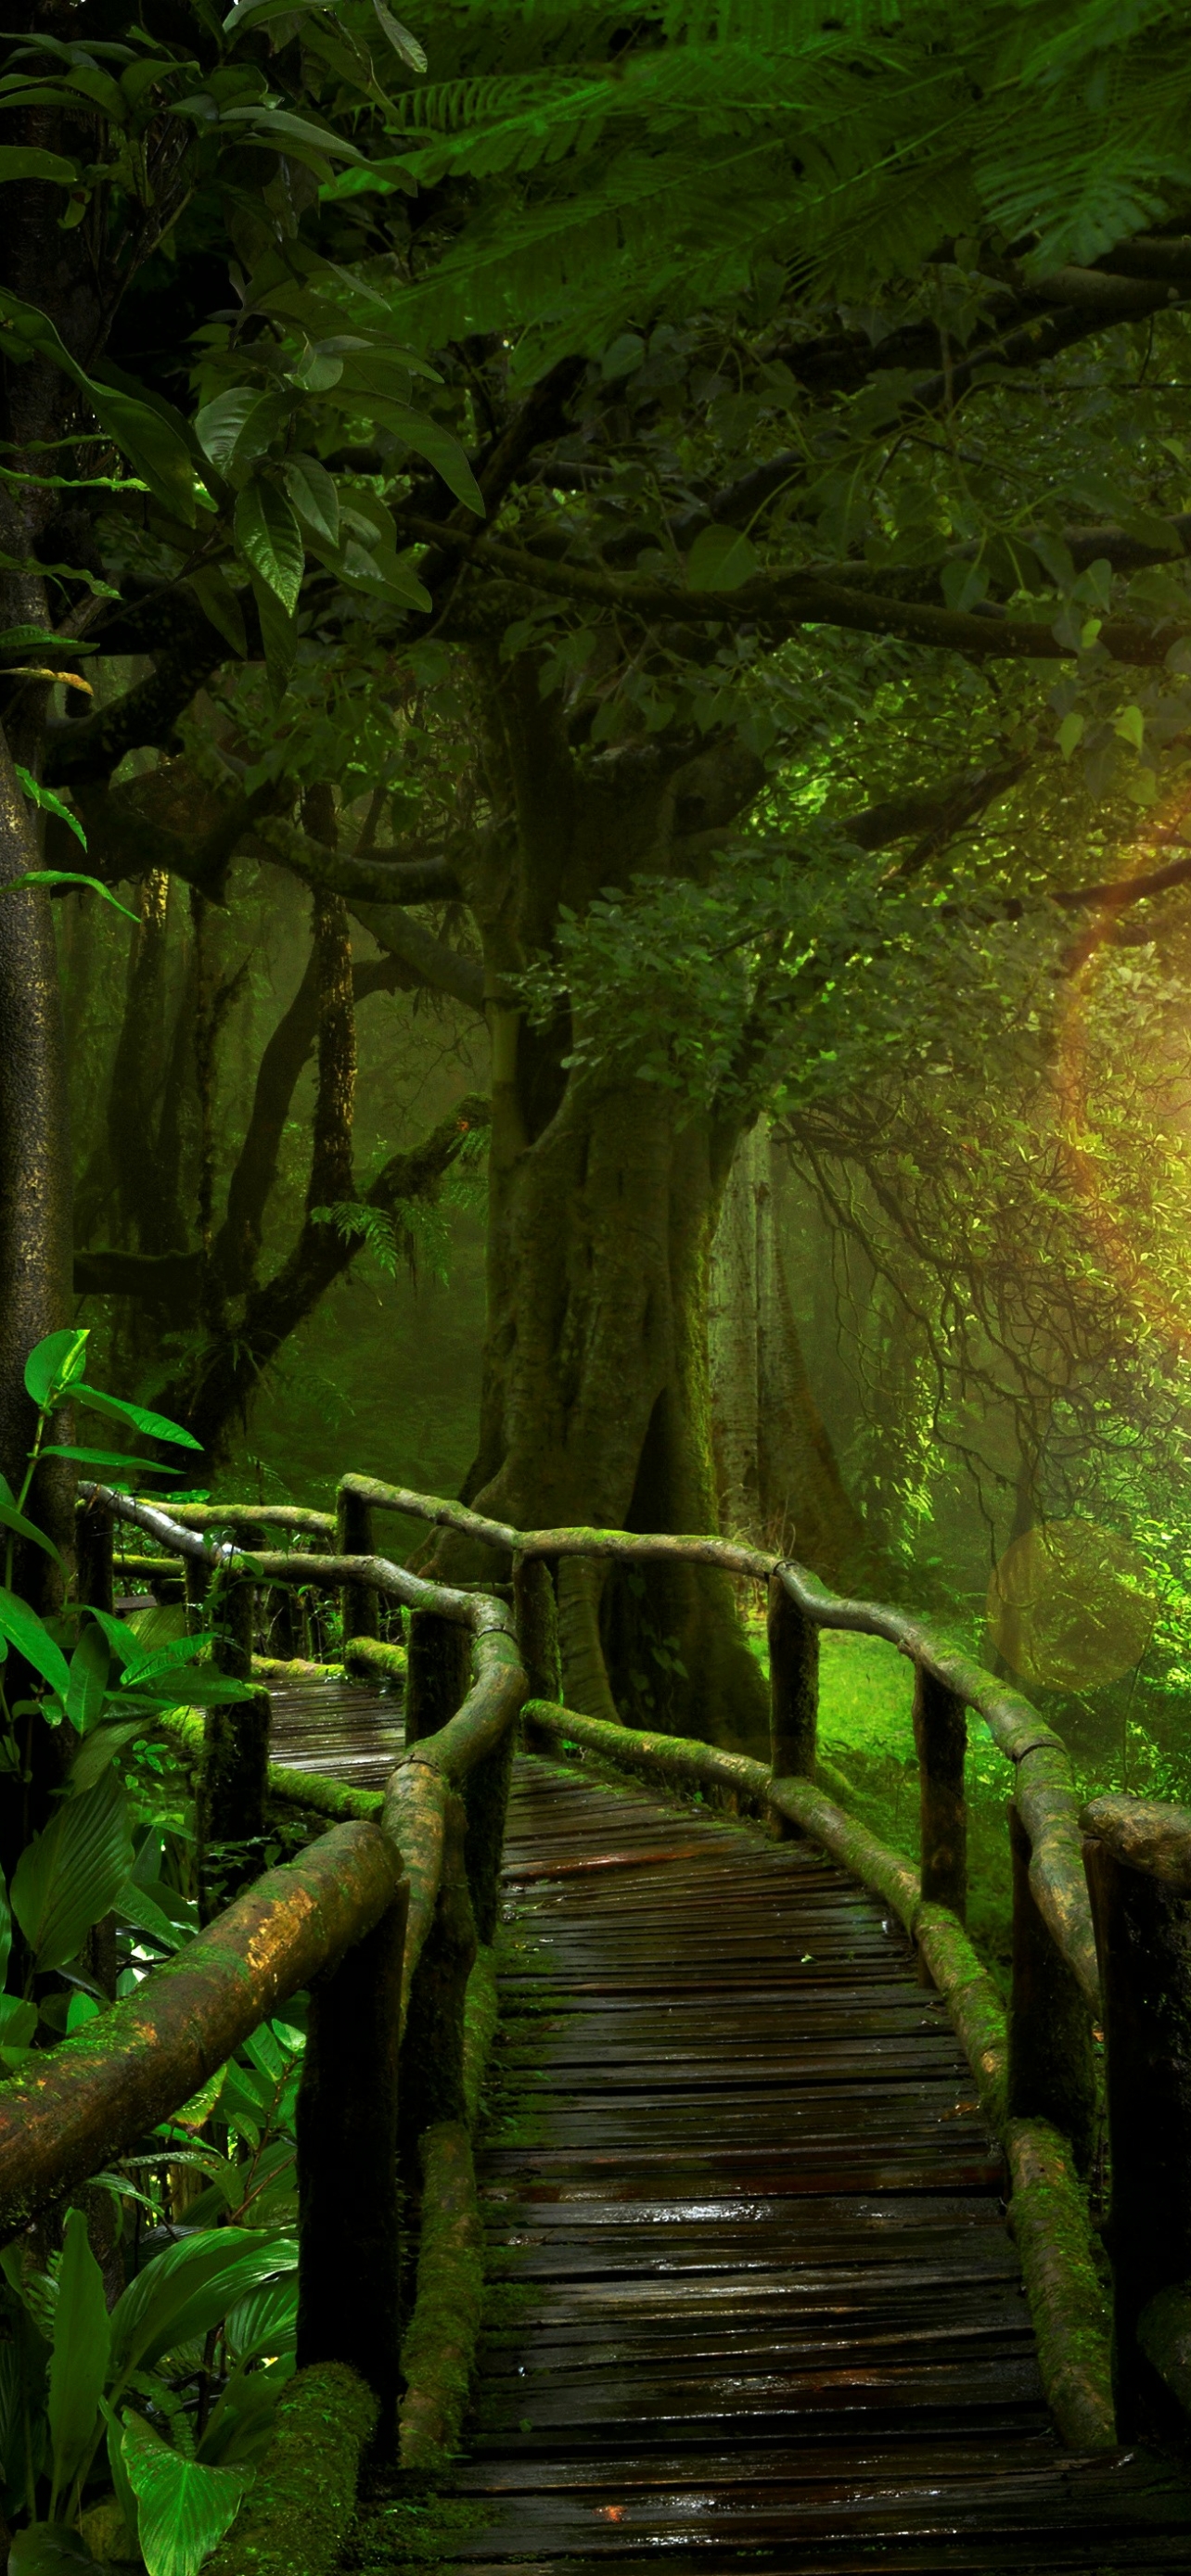 Bridge in Tropical Forest